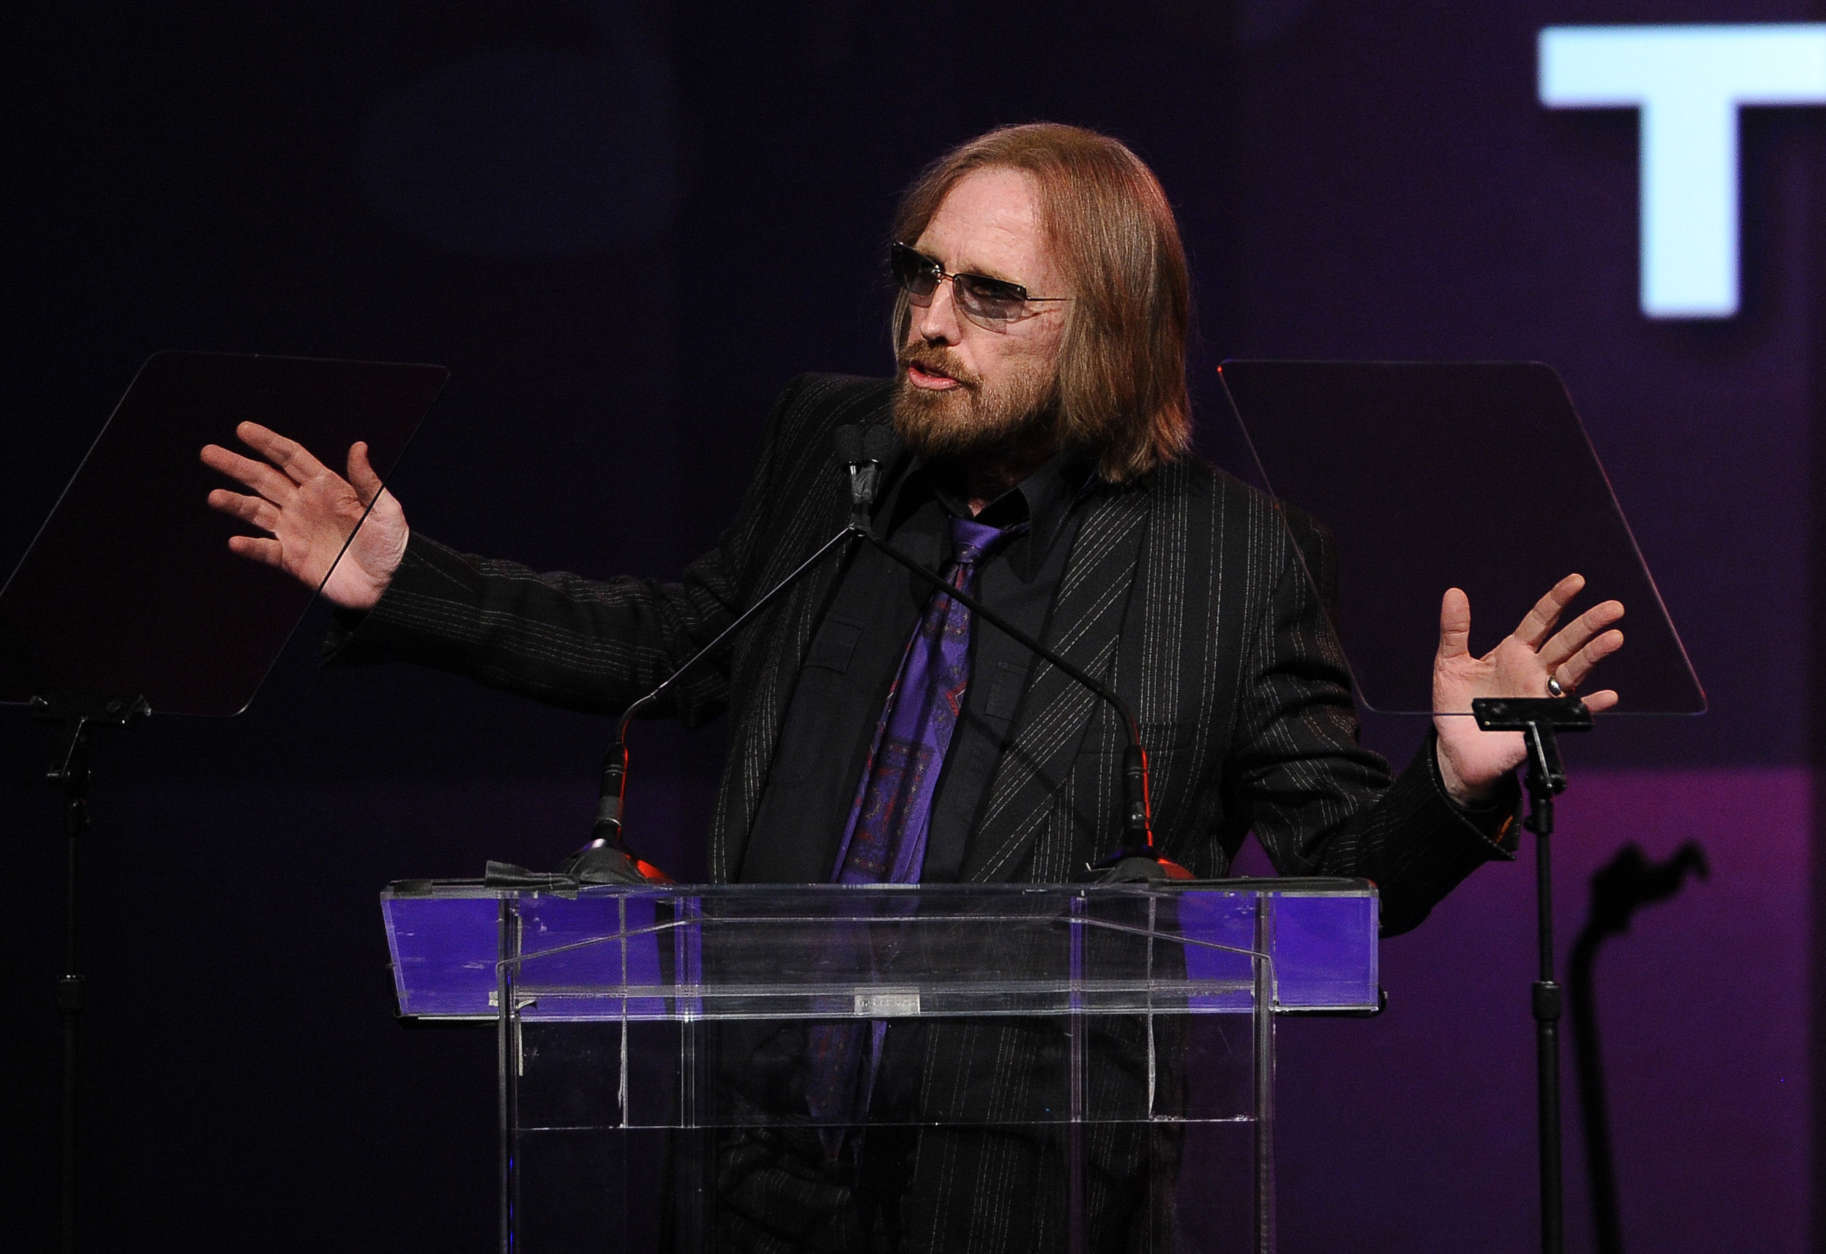 Tom Petty accepts the Founders Award on stage at the 31st Annual ASCAP Pop Music Awards at the Loews Hollywood Hotel on Wednesday, April 23, 2014, in Los Angeles. (Photo by Chris Pizzello/Invision/AP)